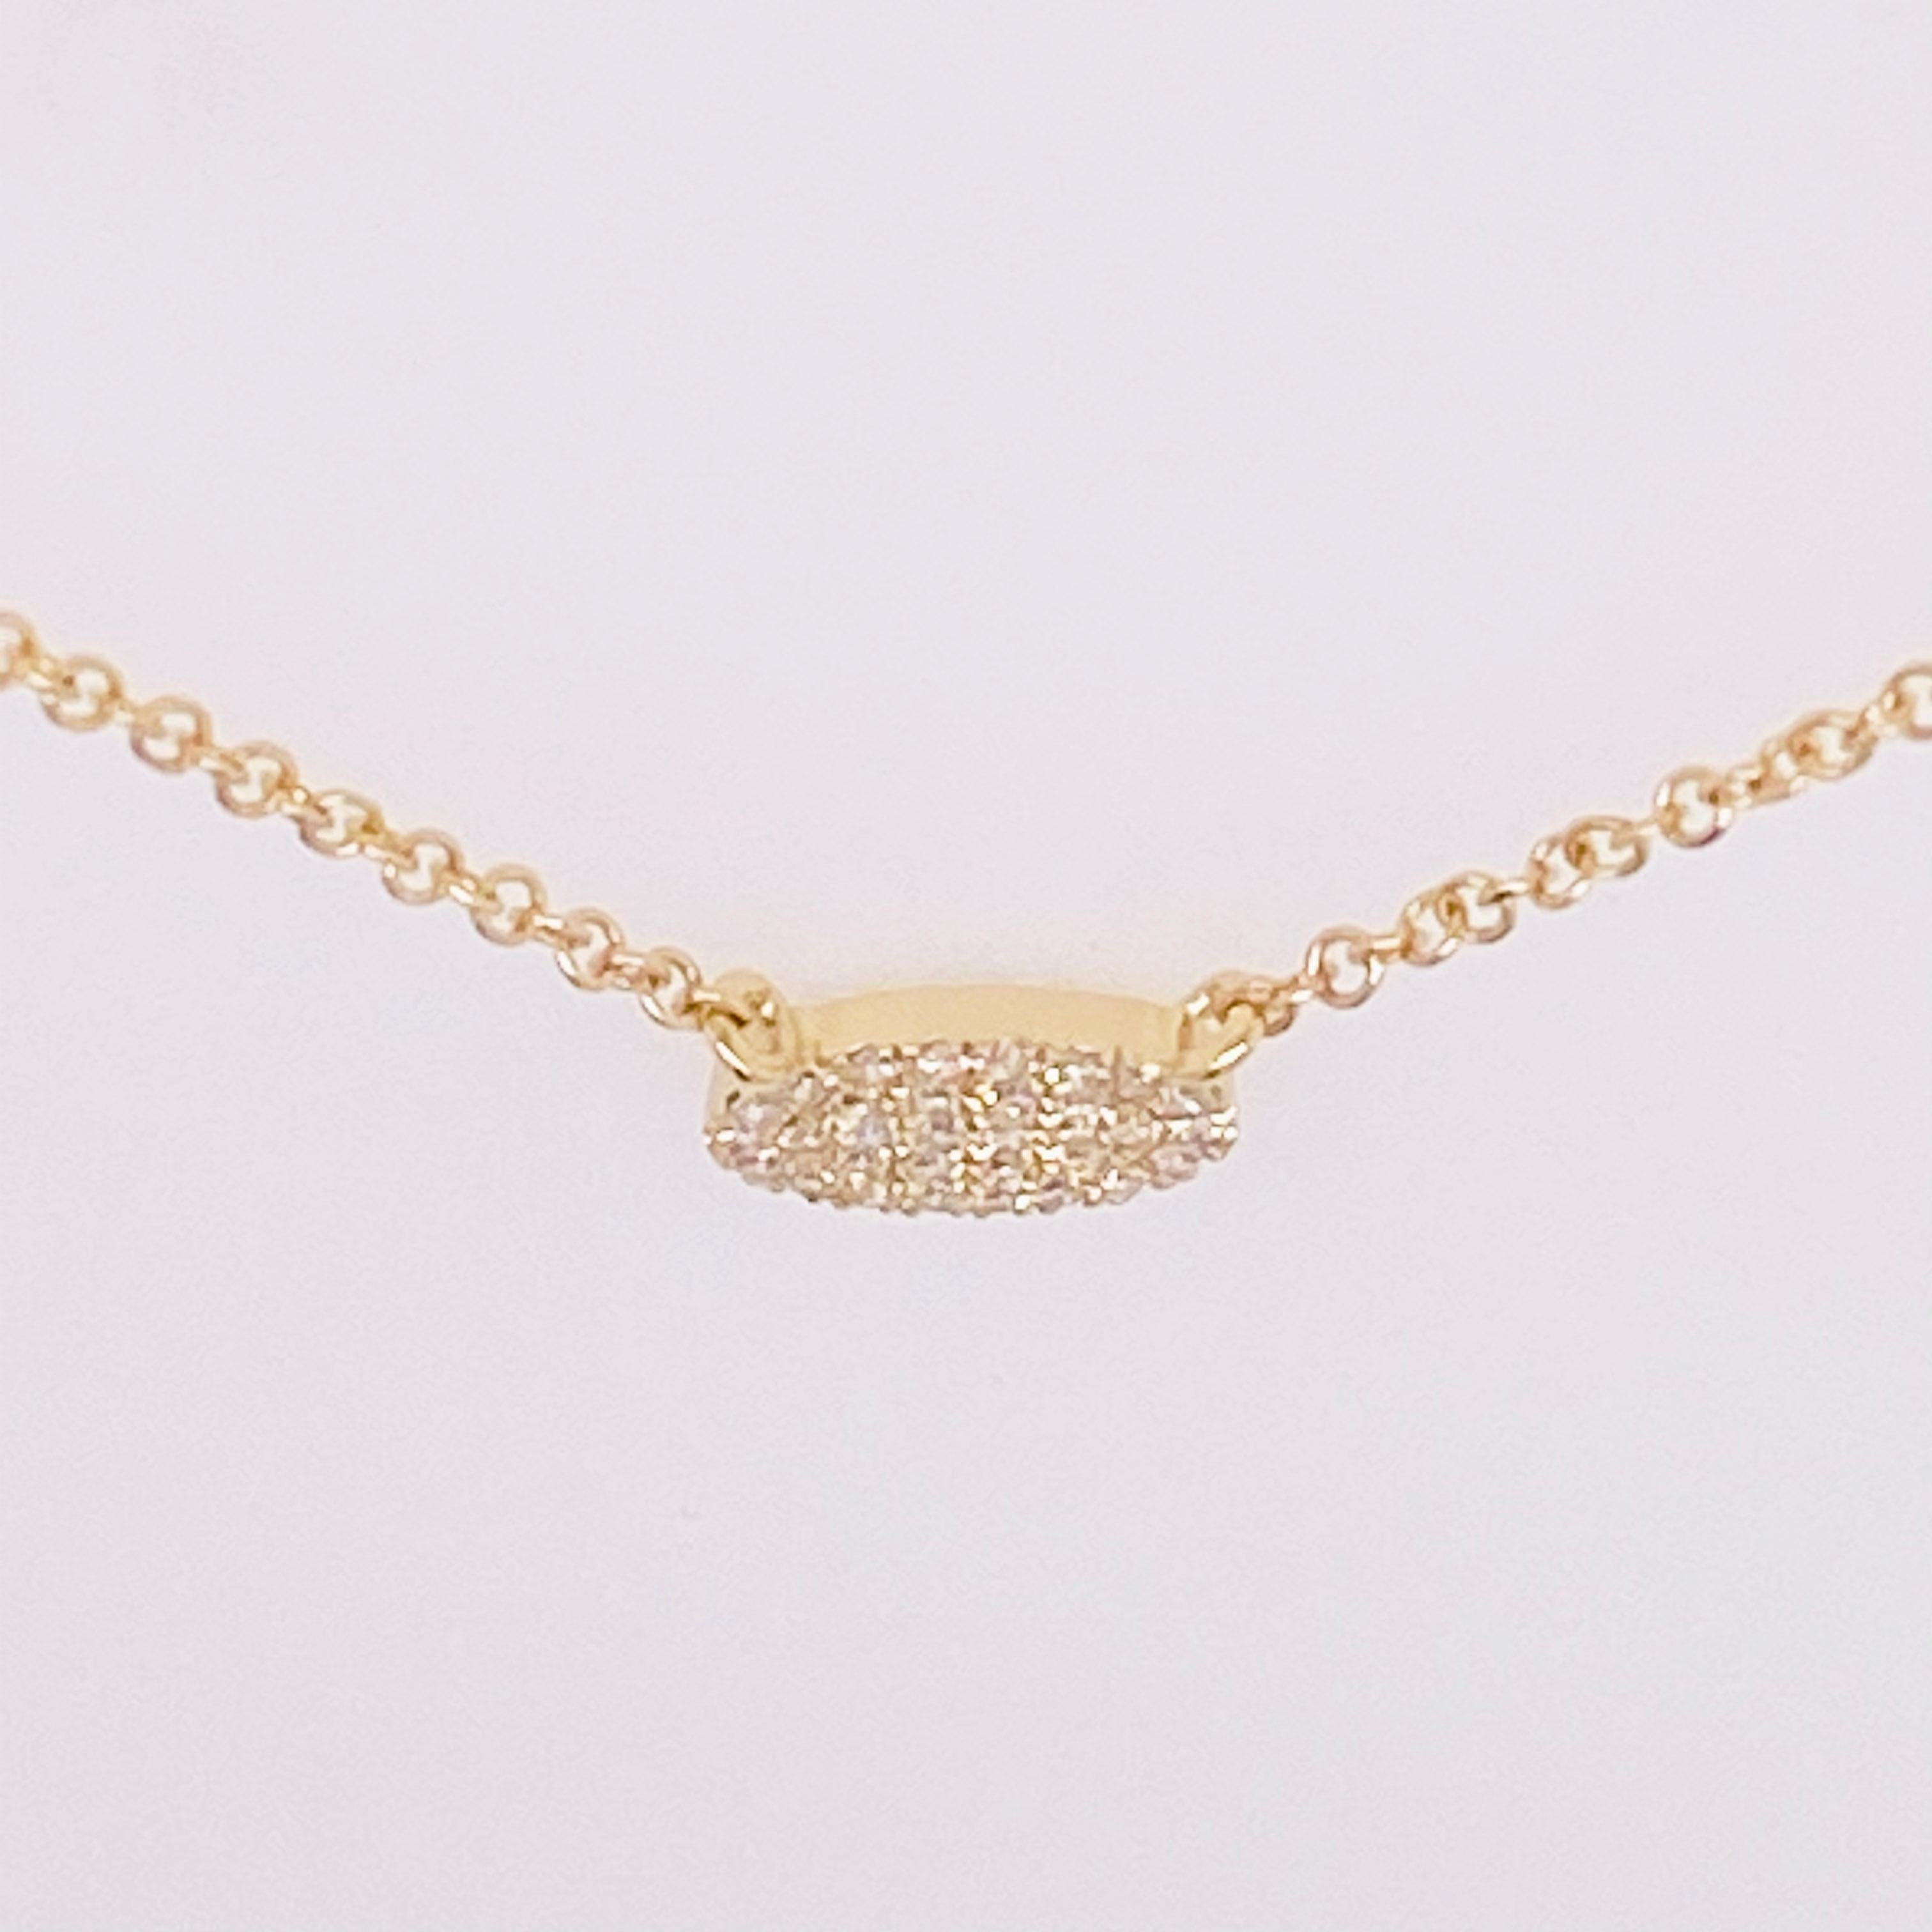 Pave Diamond Disk Necklace, 14 Karat Yellow Gold, Oval Diamond Disk Pendant Bolo In New Condition For Sale In Austin, TX